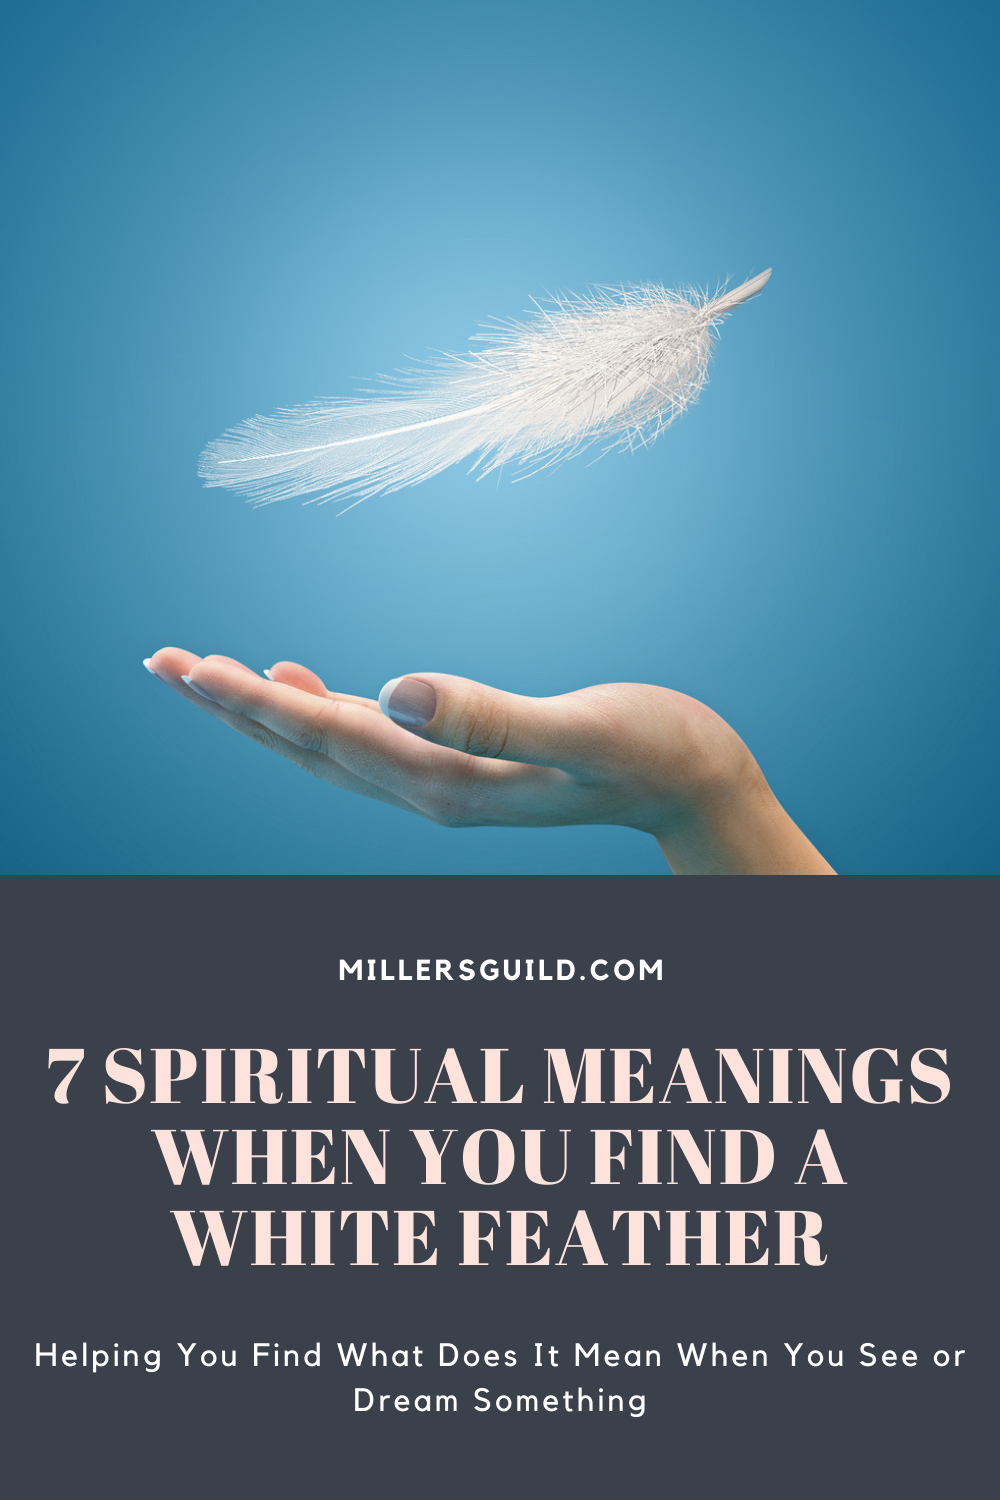 7 Spiritual Meanings When You Find a White Feather 2